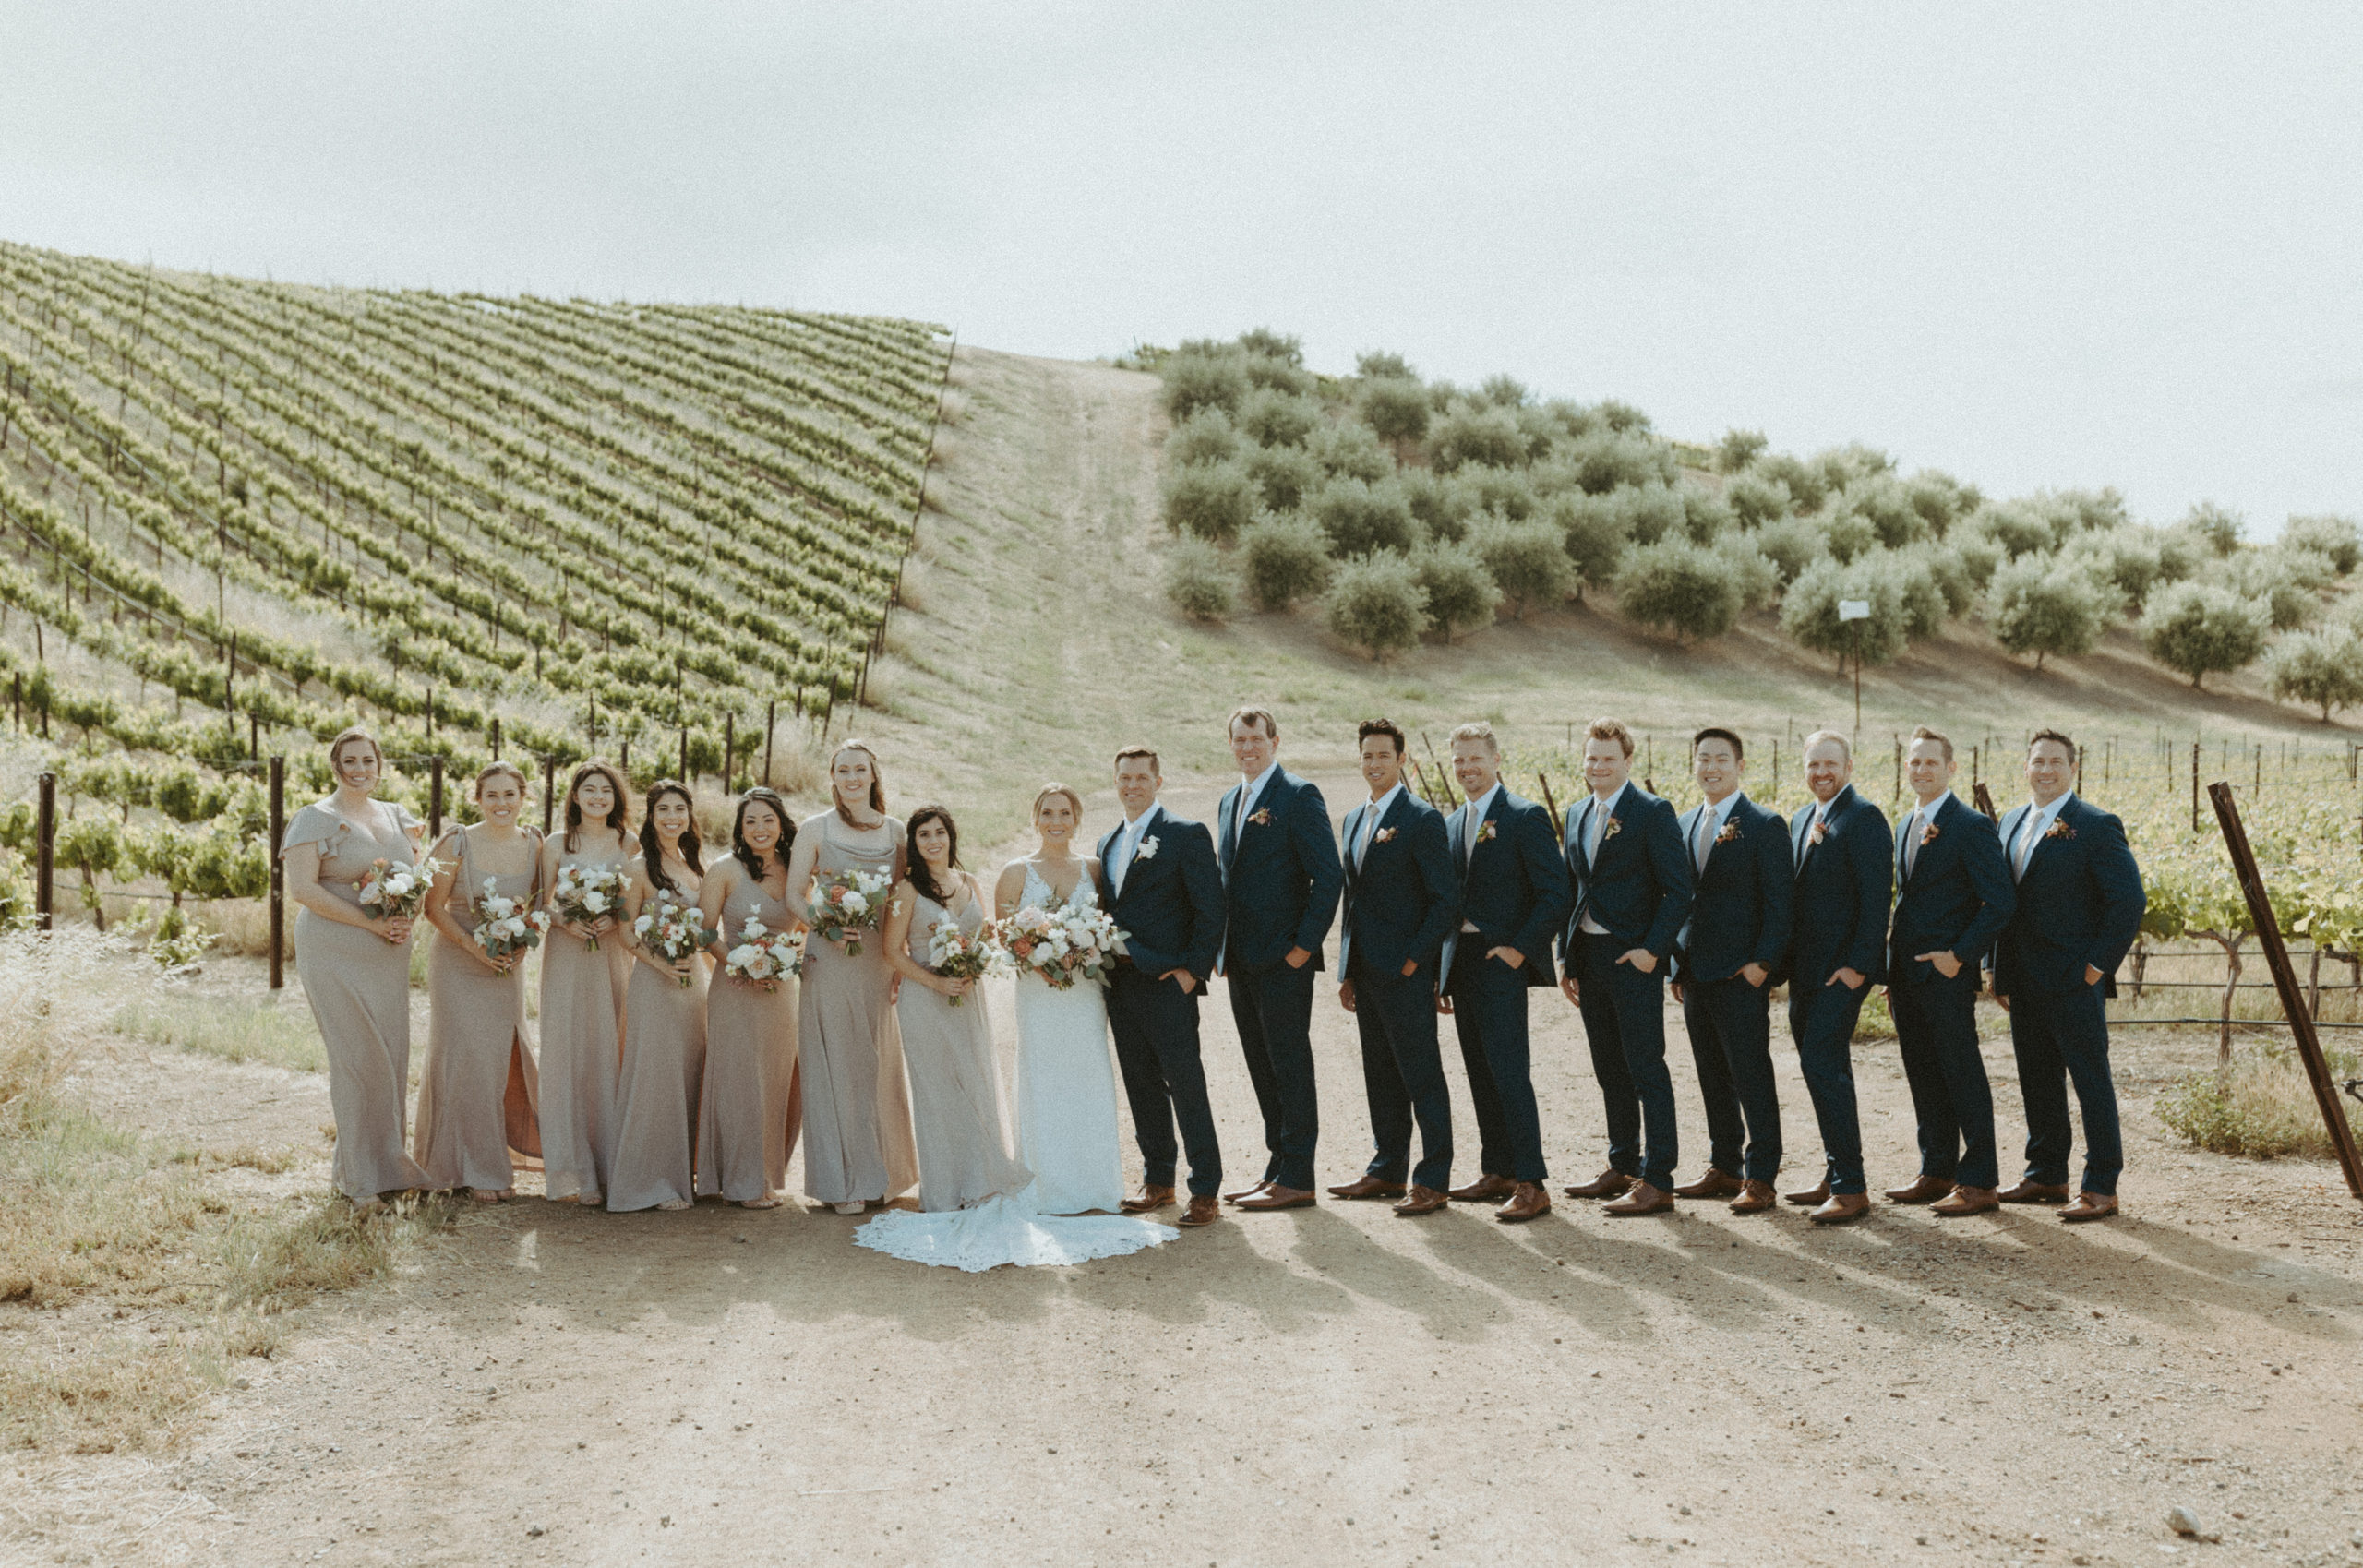 the bridal party photos in the vineyard in California